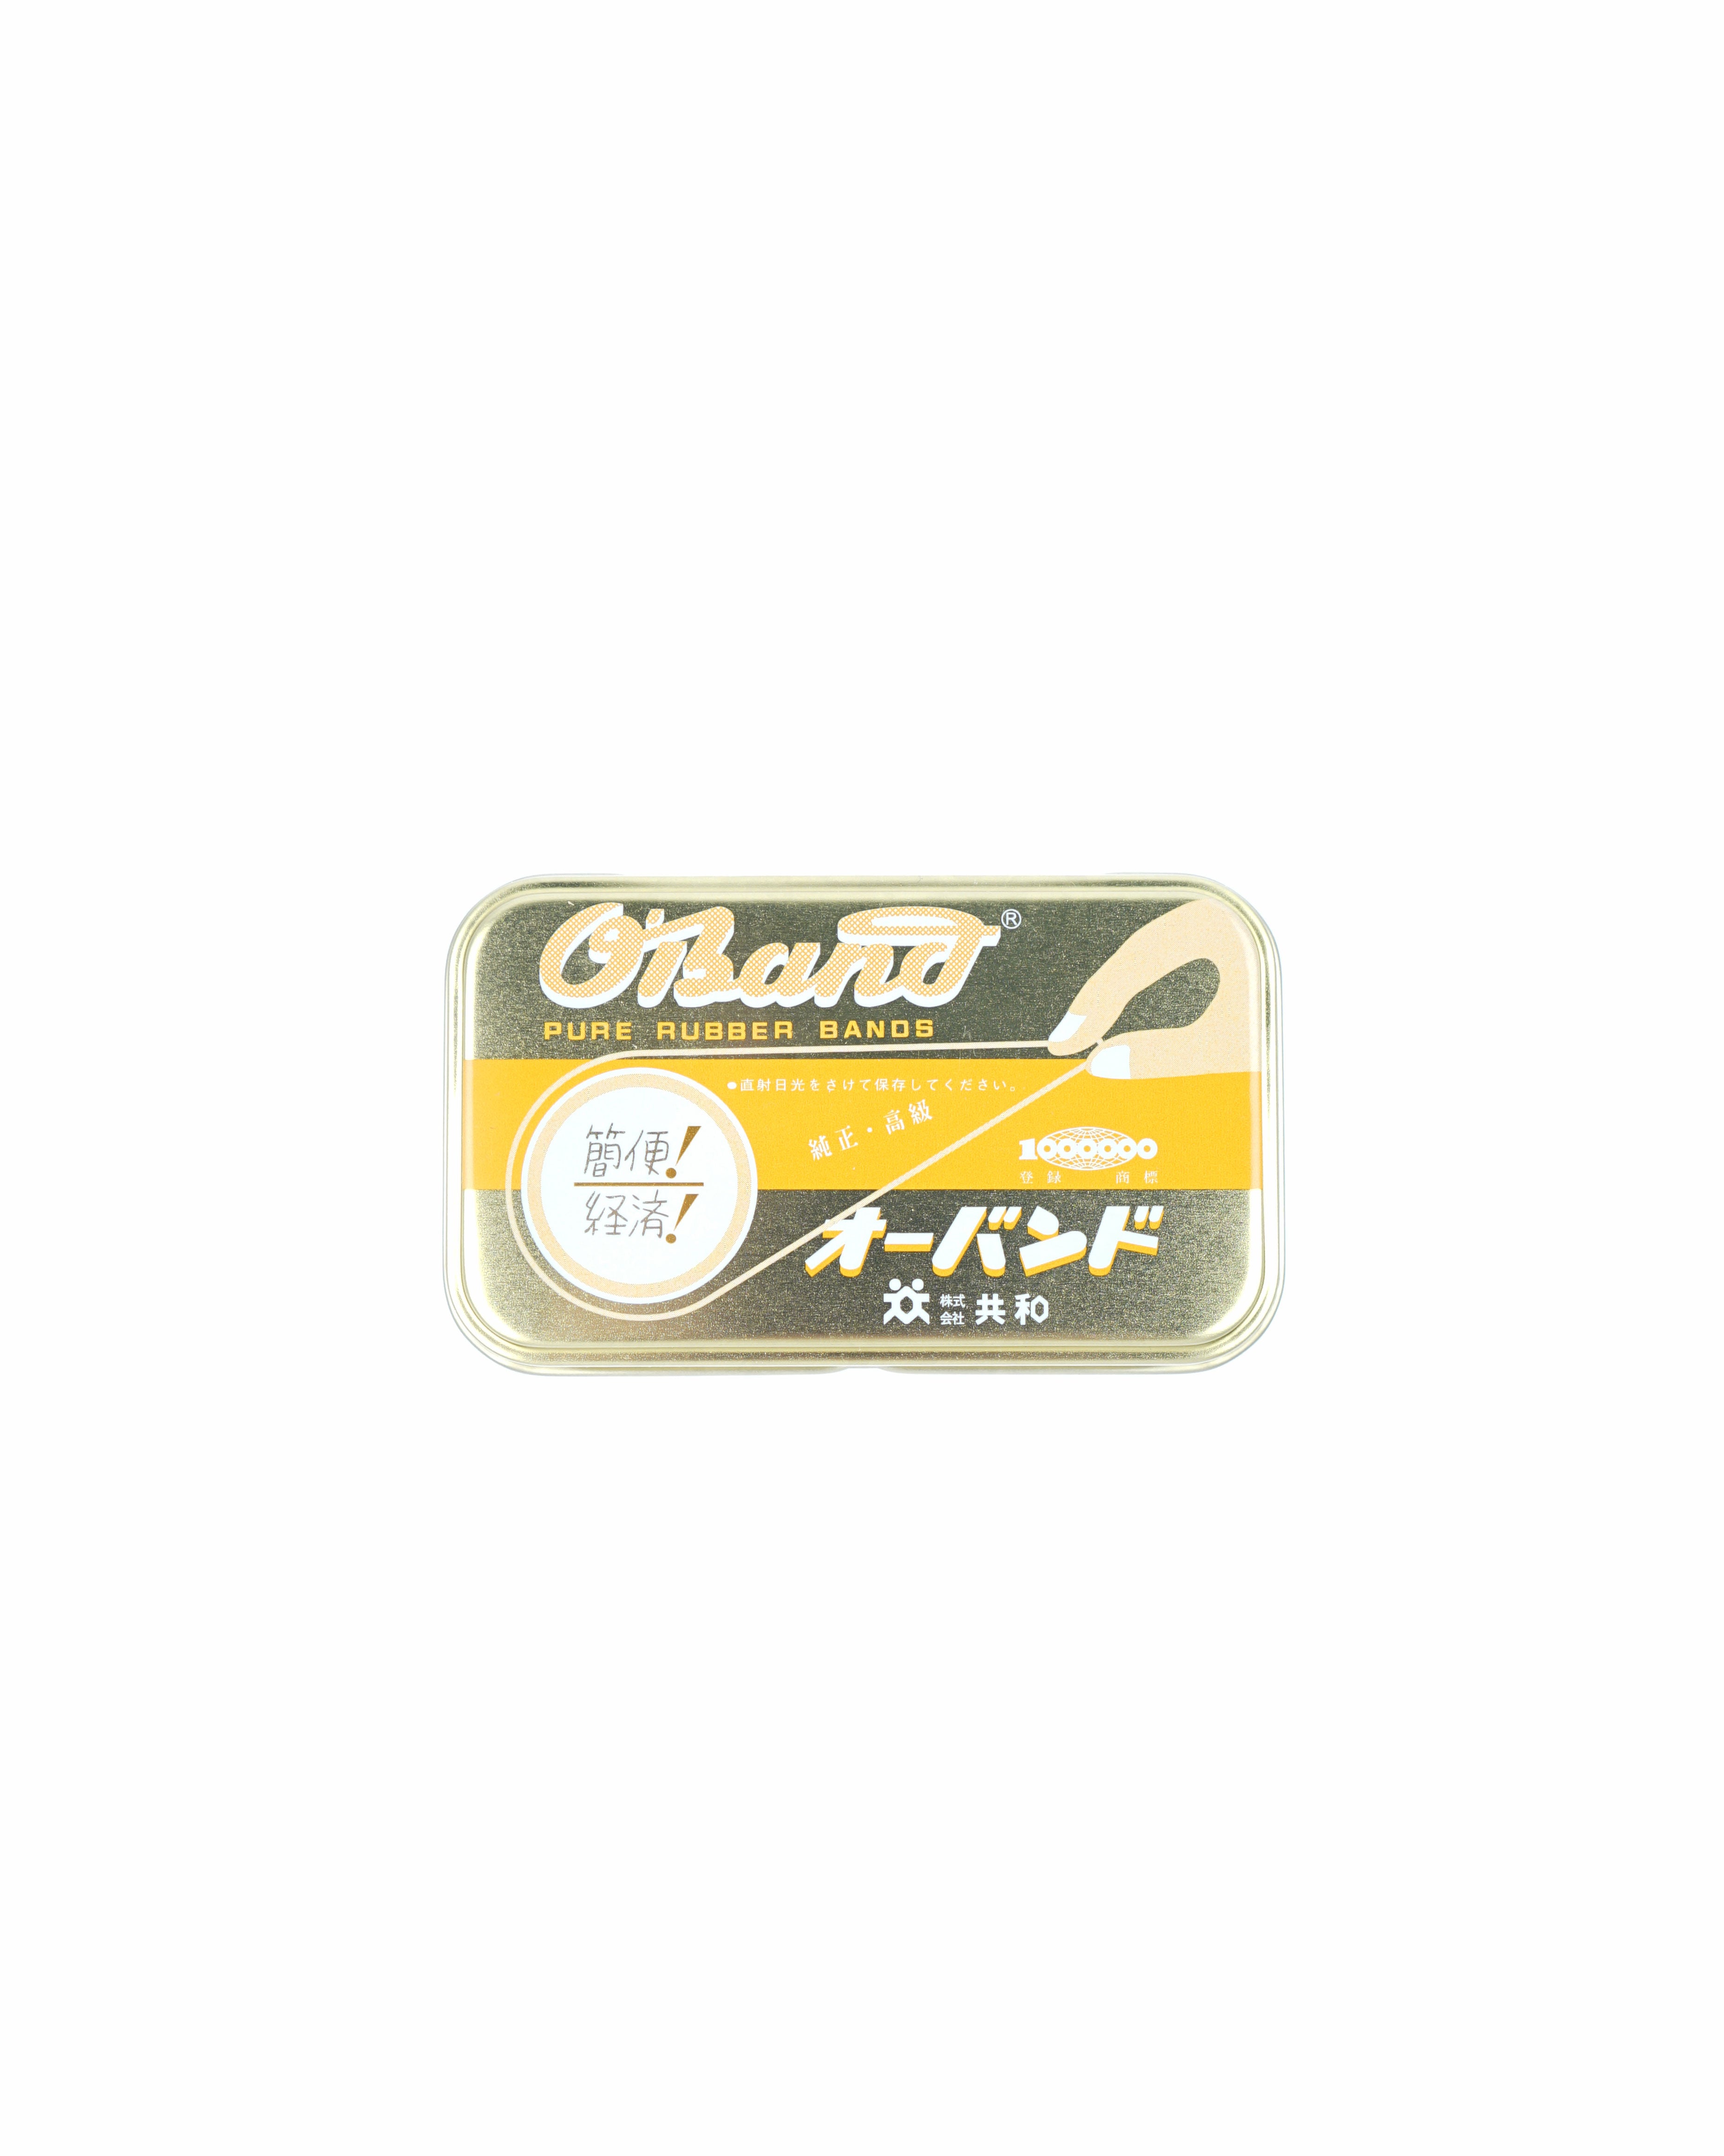 Kyowa Classic O'Band Rubber Bands - Multicolor